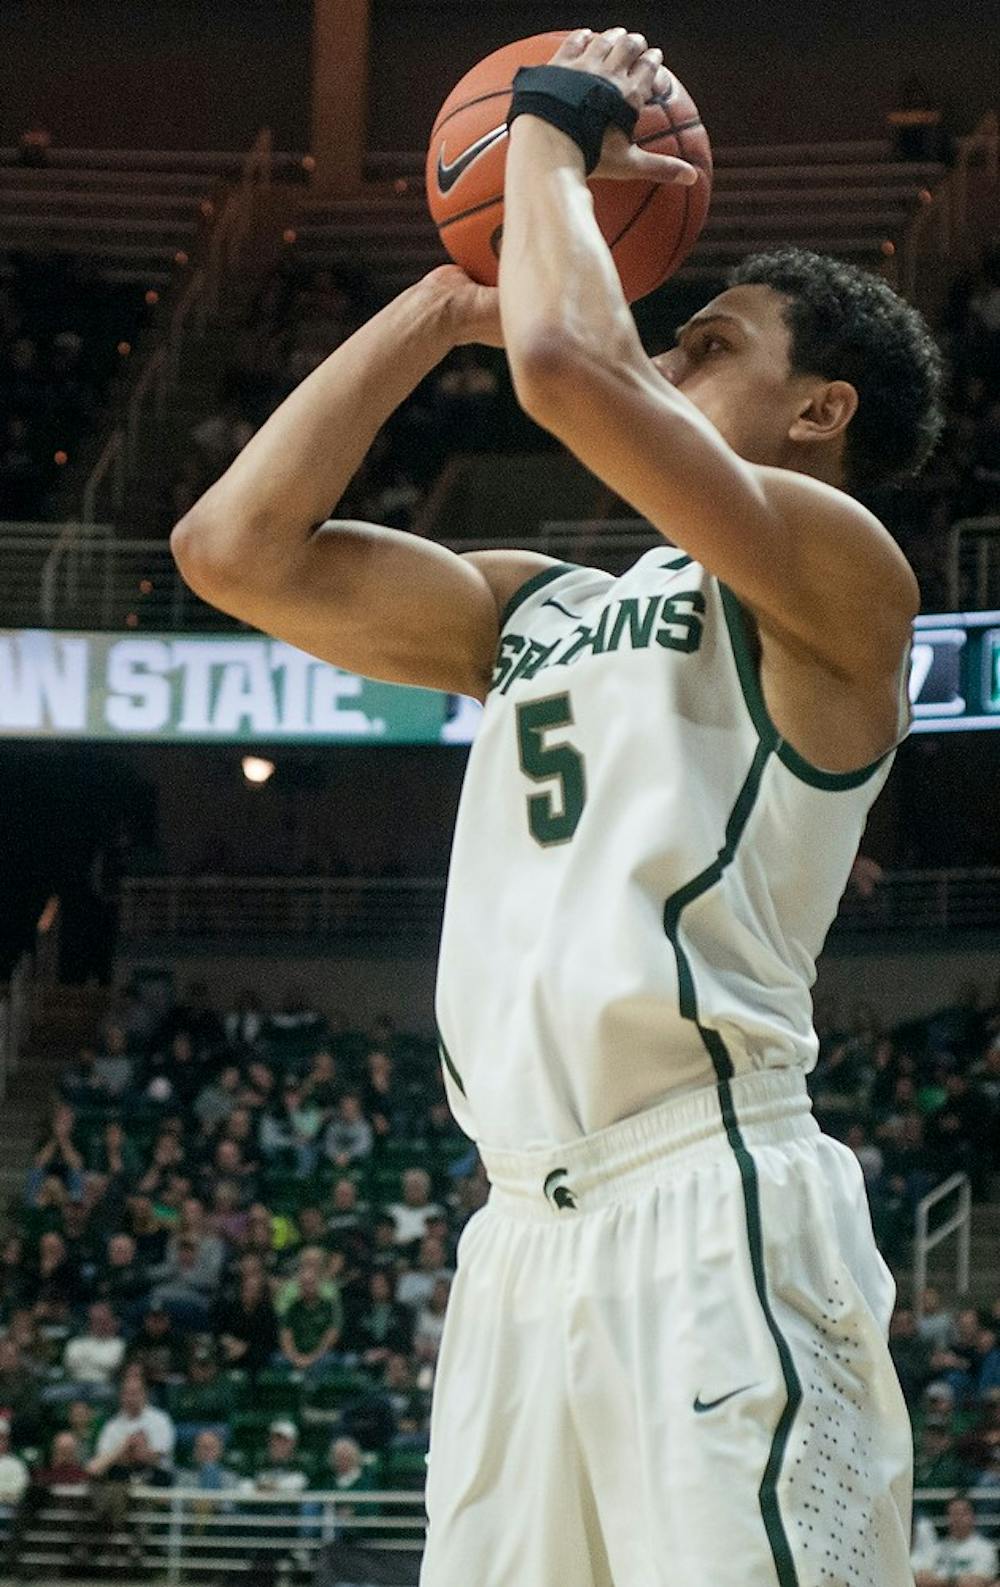 <p>Junior guard Bryn Forbes goes up for a point during the game against Arkansas-Pine Bluff on Dec. 6, 2014, at the Spartan Stadium. The Spartans defeated the Golden Lions, 85-52. Aerika Williams/The State News </p>